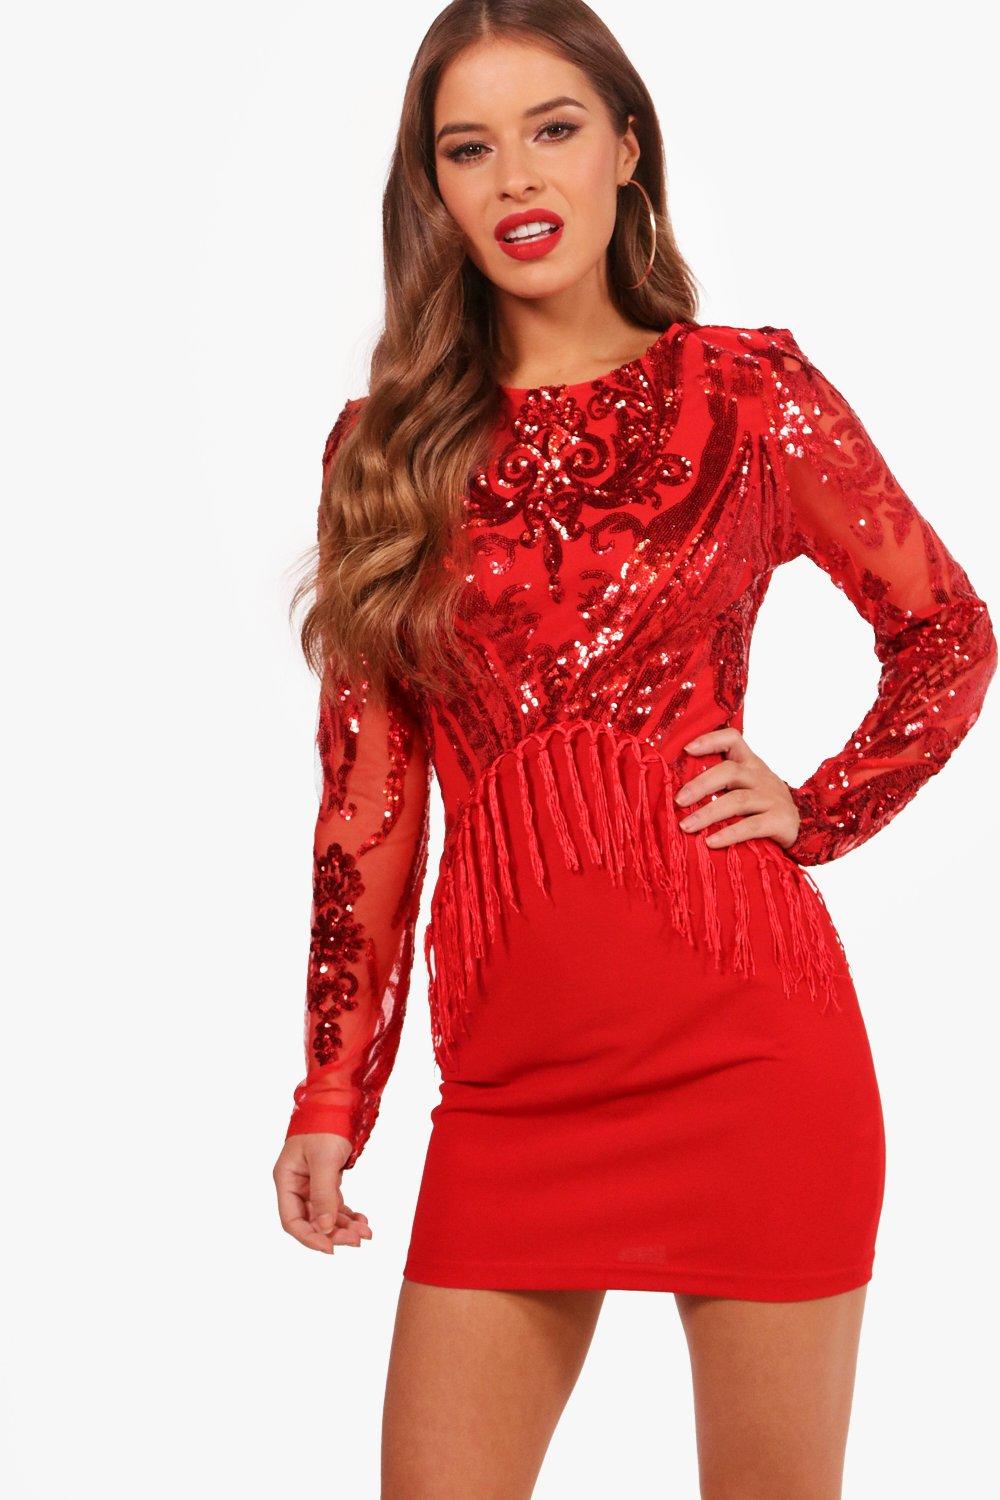 These new years eve sequin dresses are so cute, and cheap!